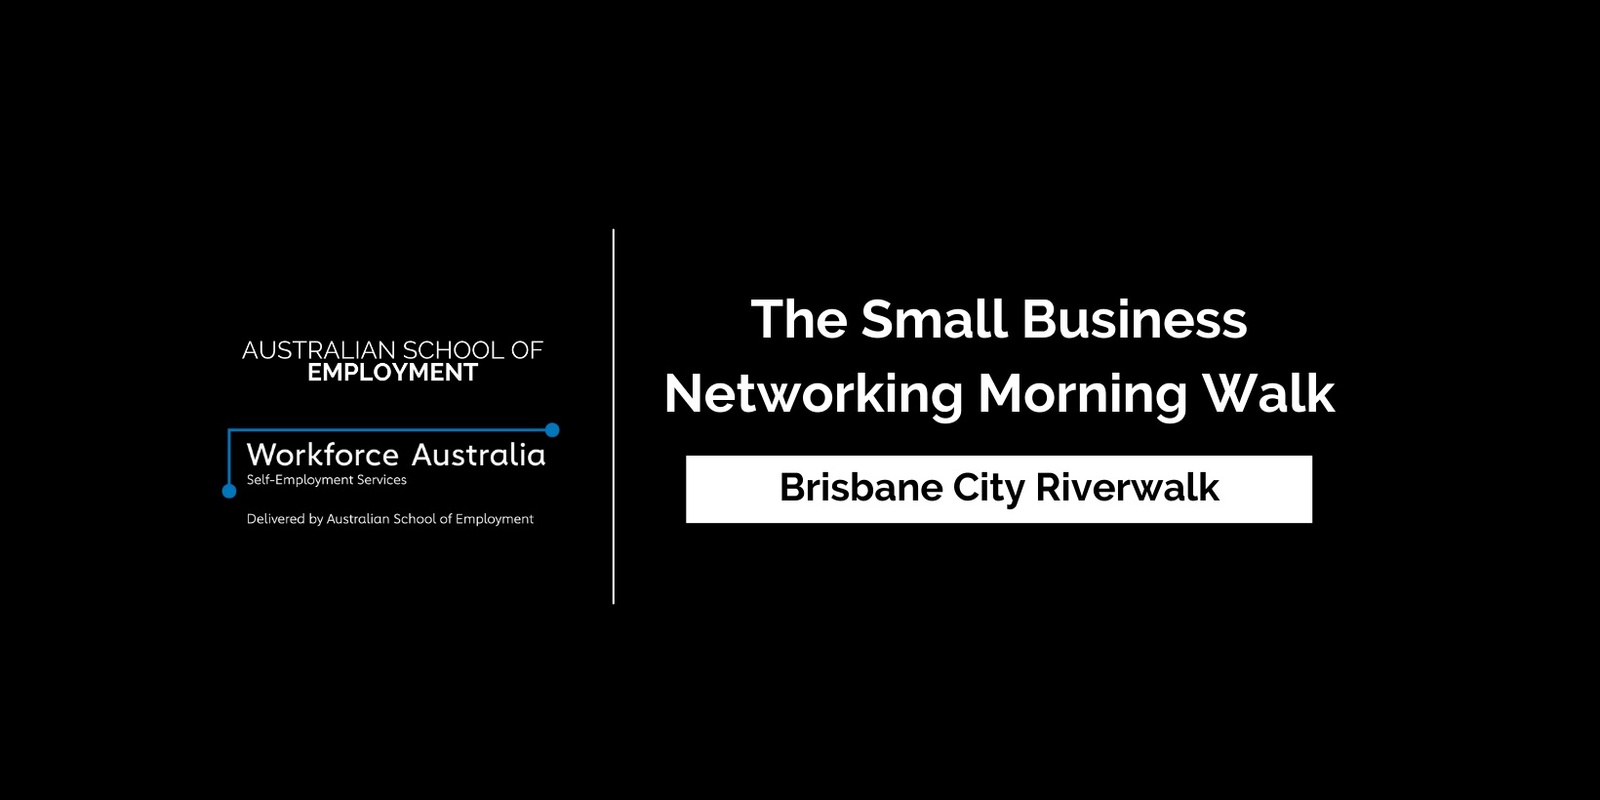 The Small Business Networking Morning Walk - Brisbane City